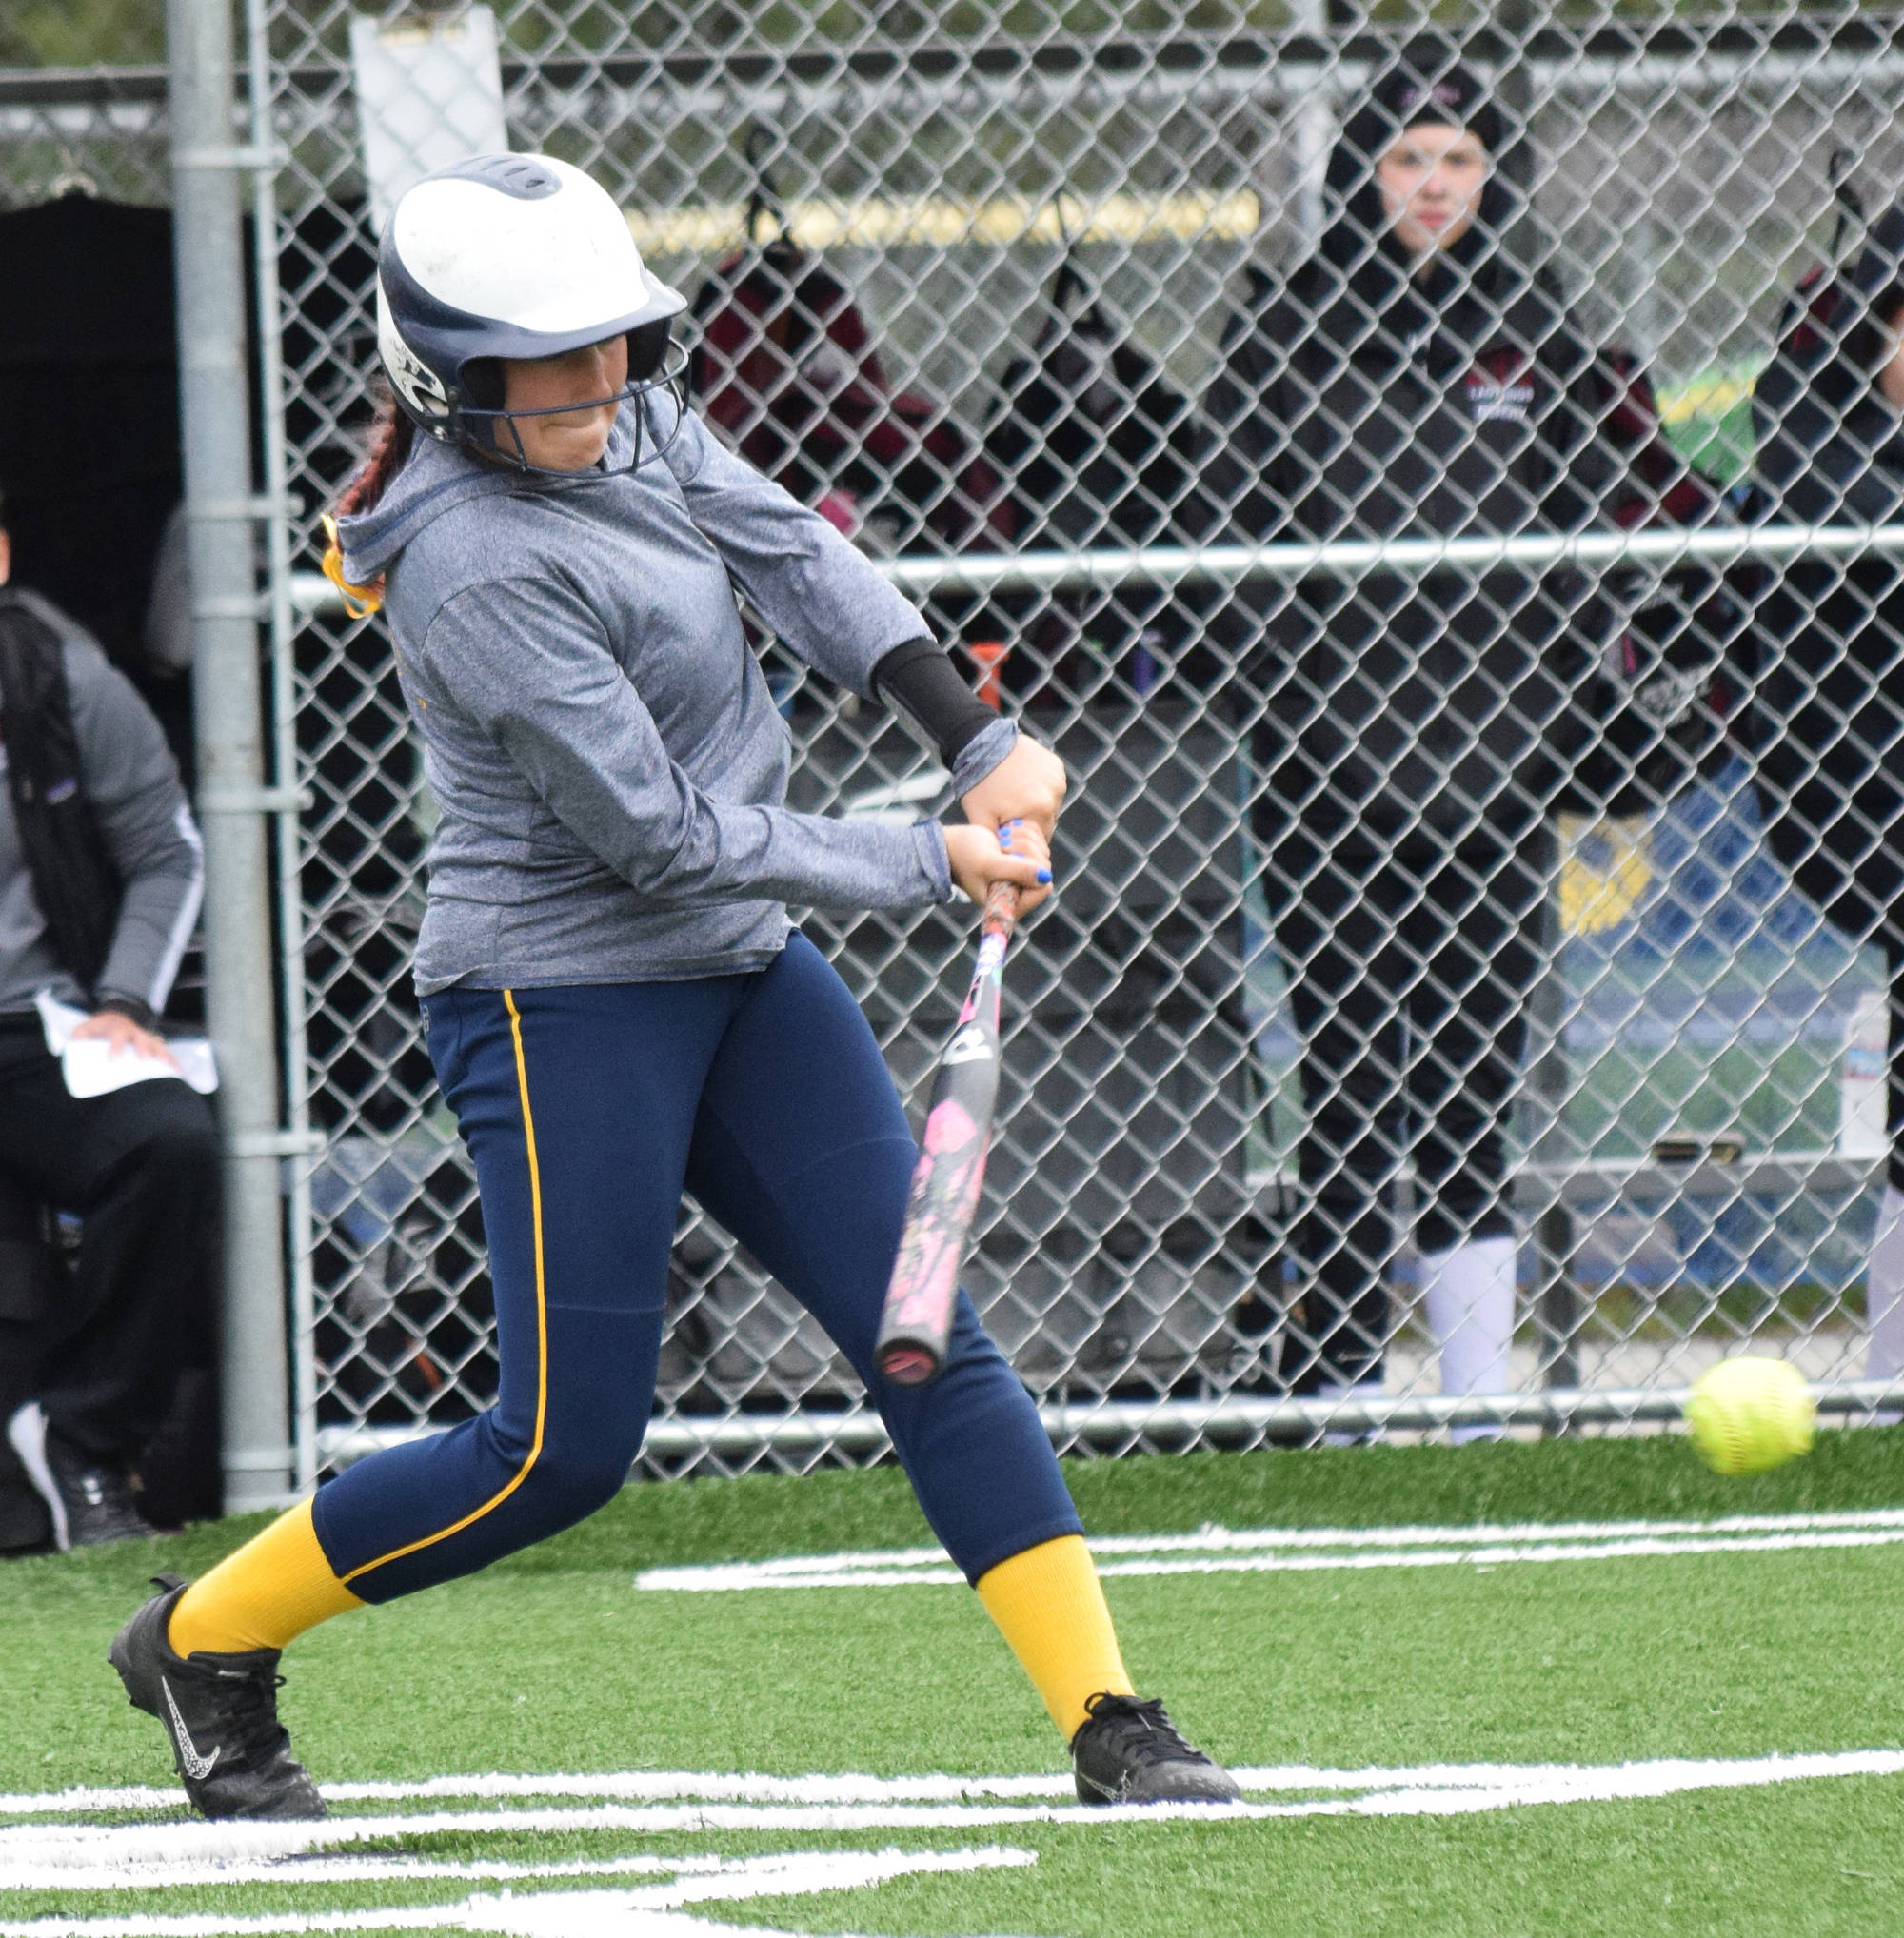 Homer’s Haylee Owen takes a swing at a pitch from Ketchikan at the Division II state softball tournament Saturday, June 1, 2019, at Cartee Fields in Anchorage, Alaska. (Photo by Joey Klecka/Peninsula Clarion)